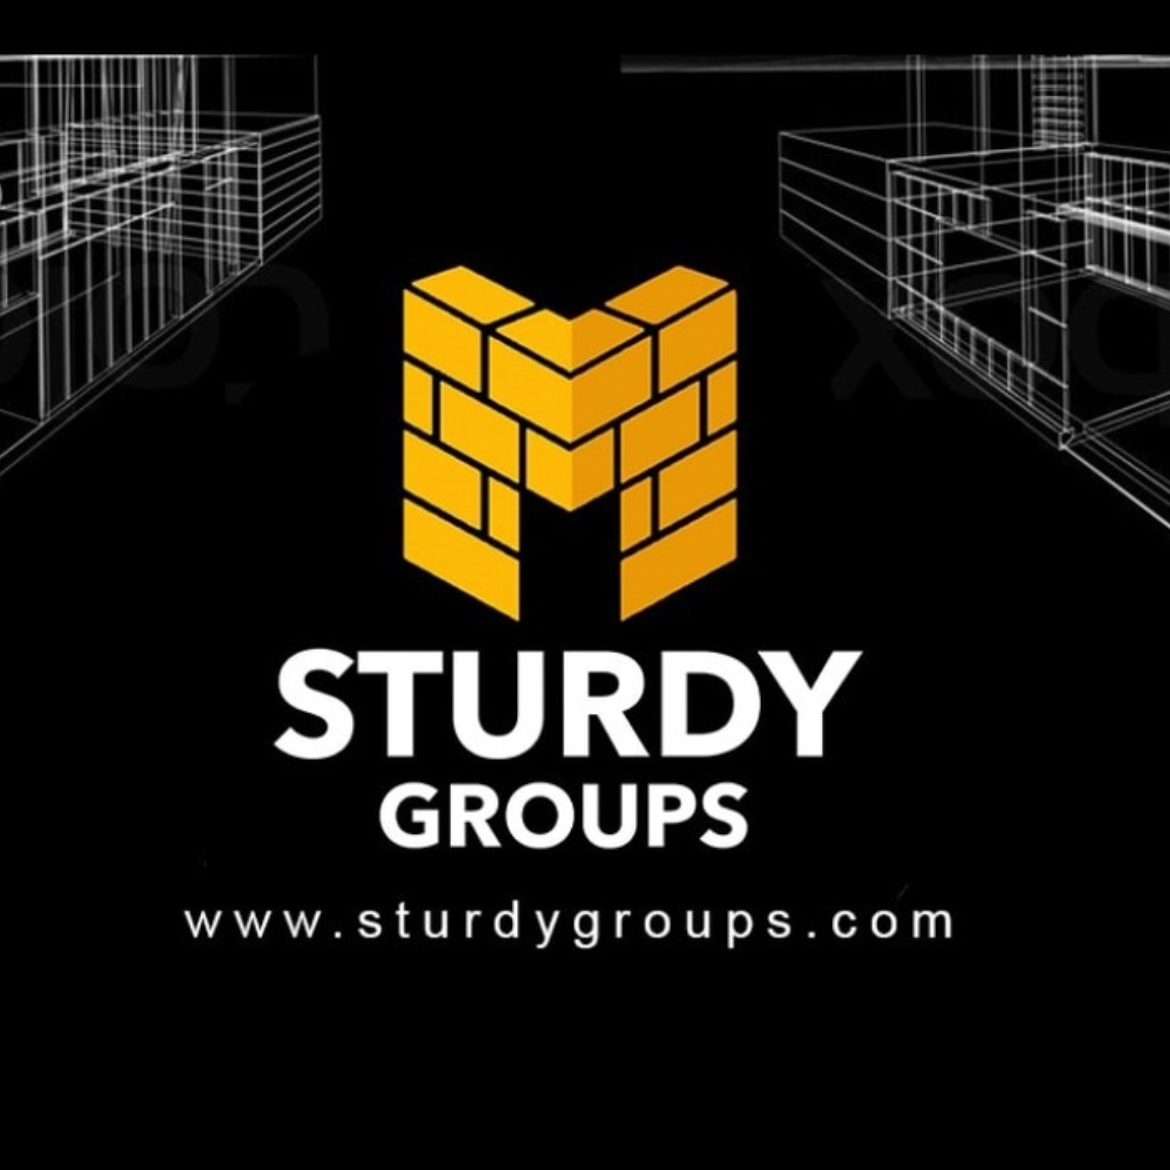 STURDY GROUPS - CONSTRUCTIONS AND INTERIORS|Architect|Professional Services